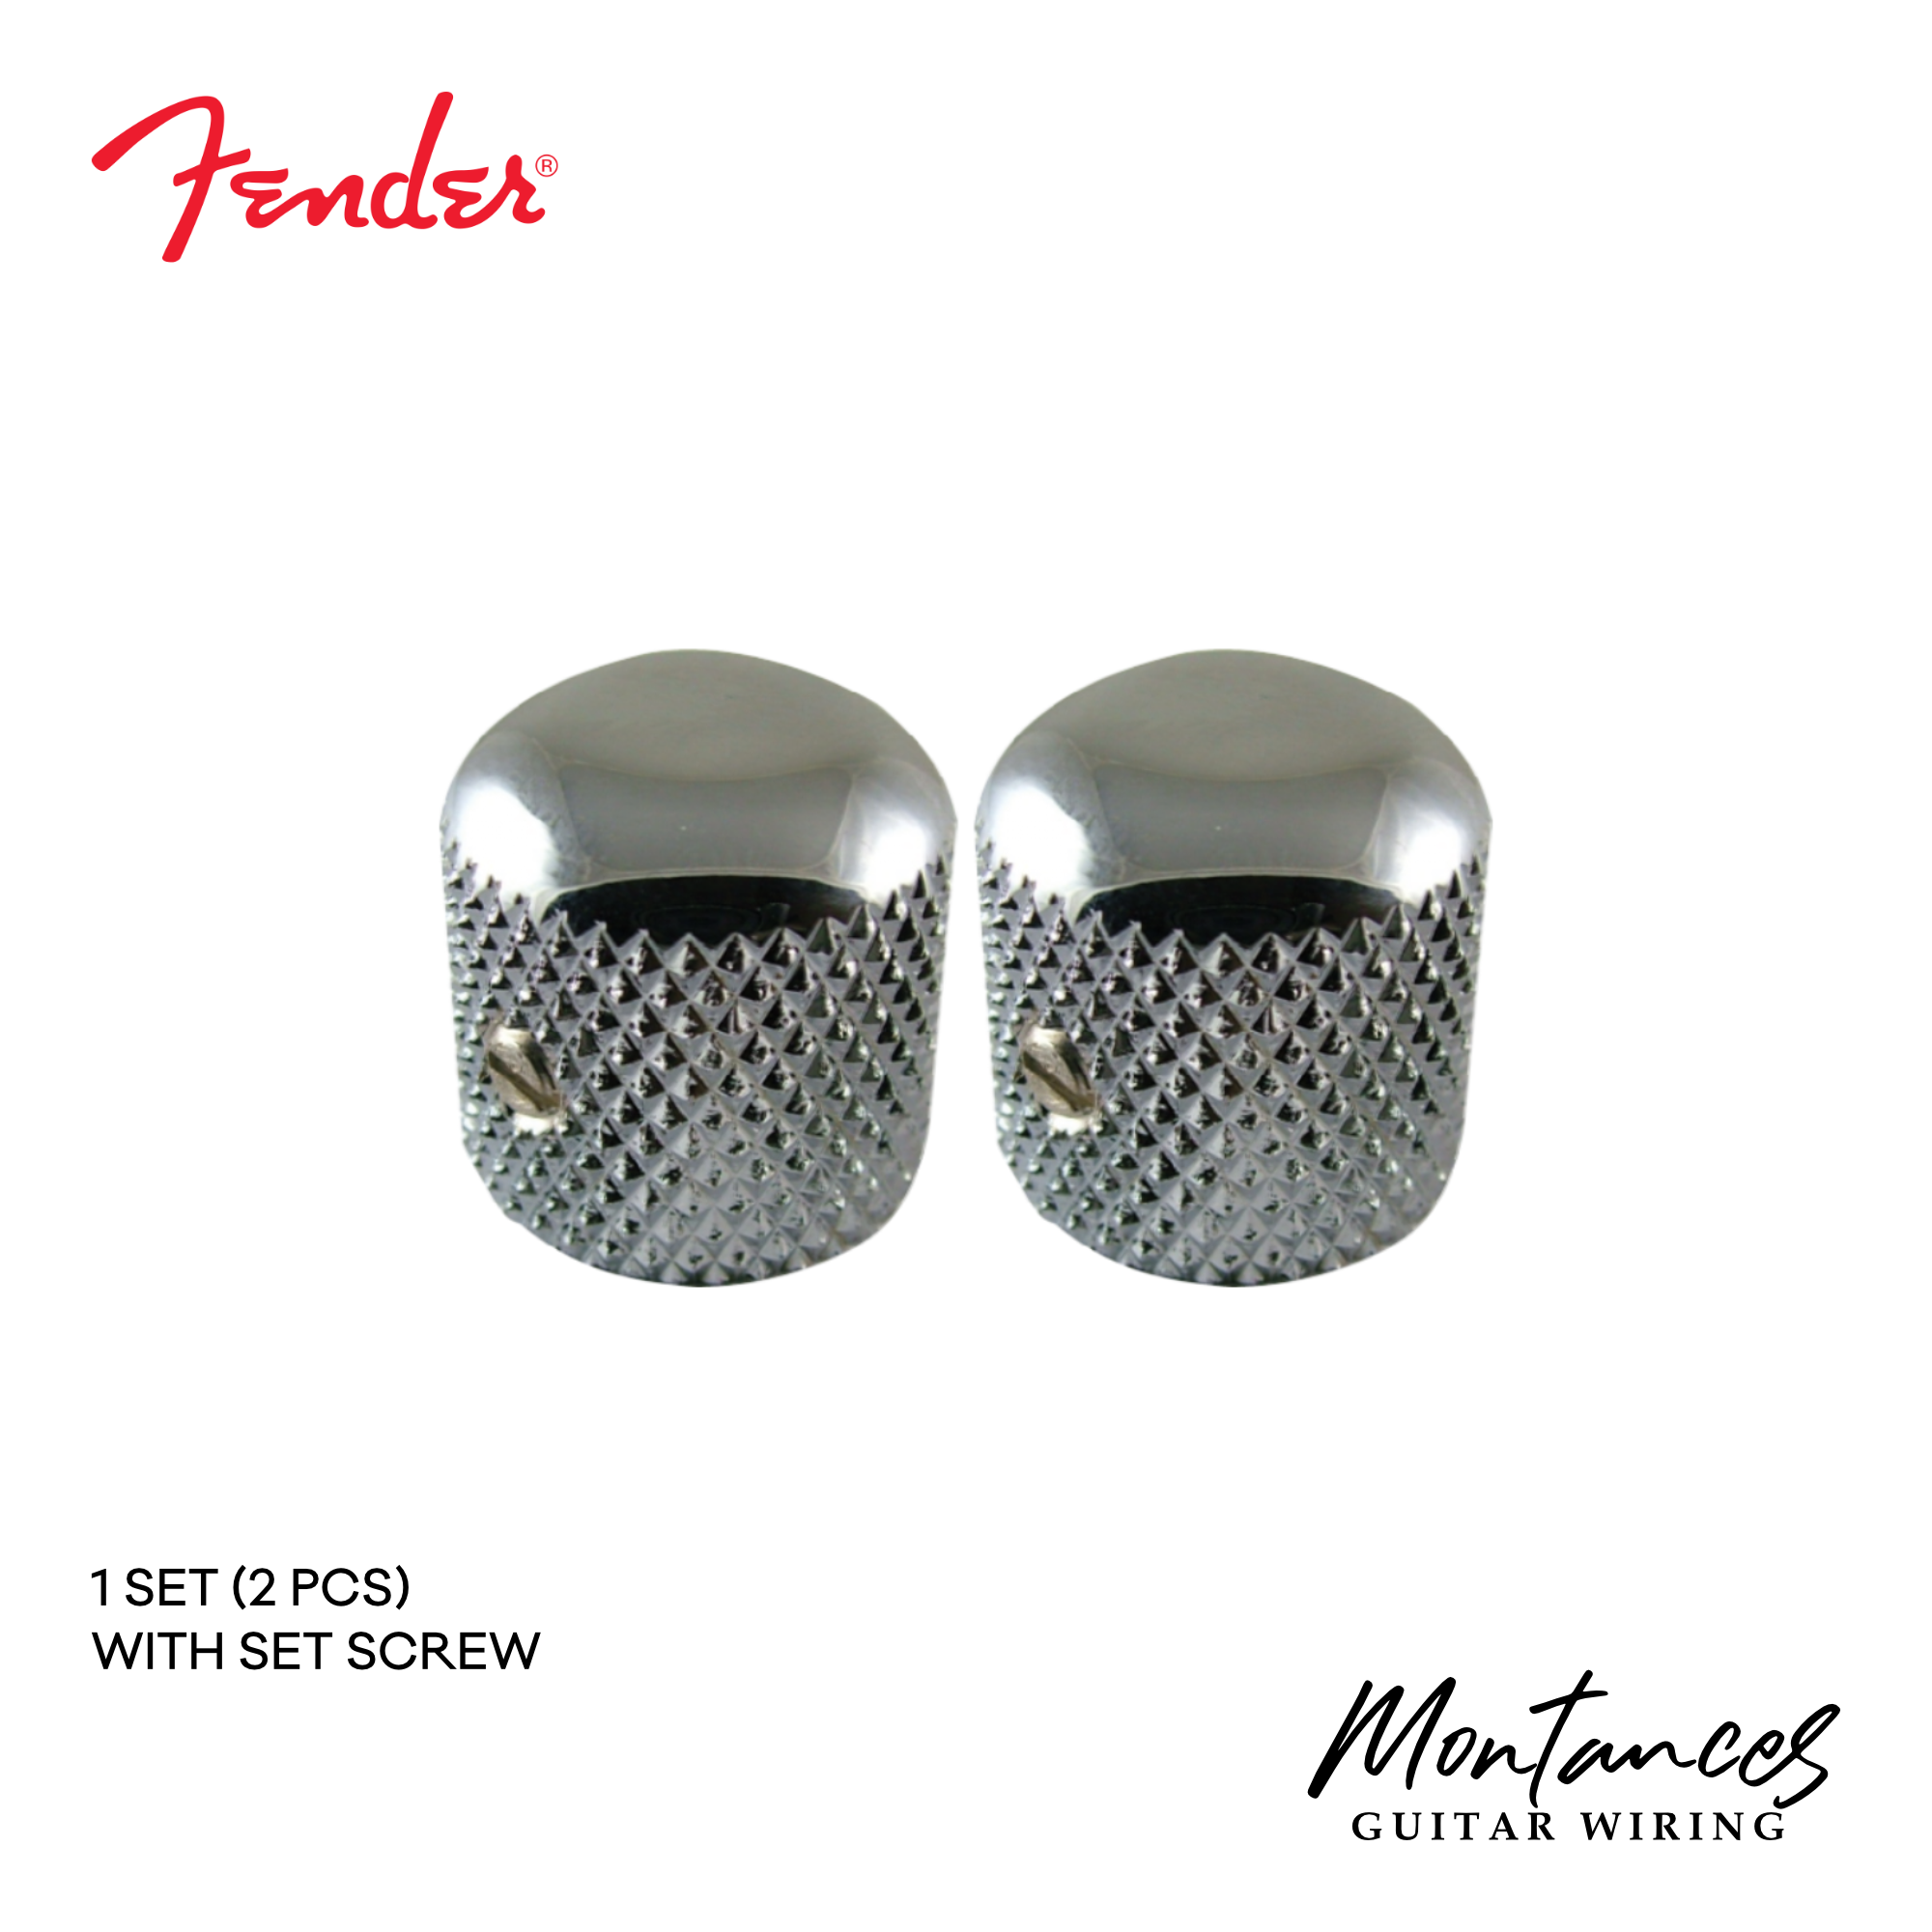 Knobs for Fender® Telecaster, Dome style, with set screw (2pcs)